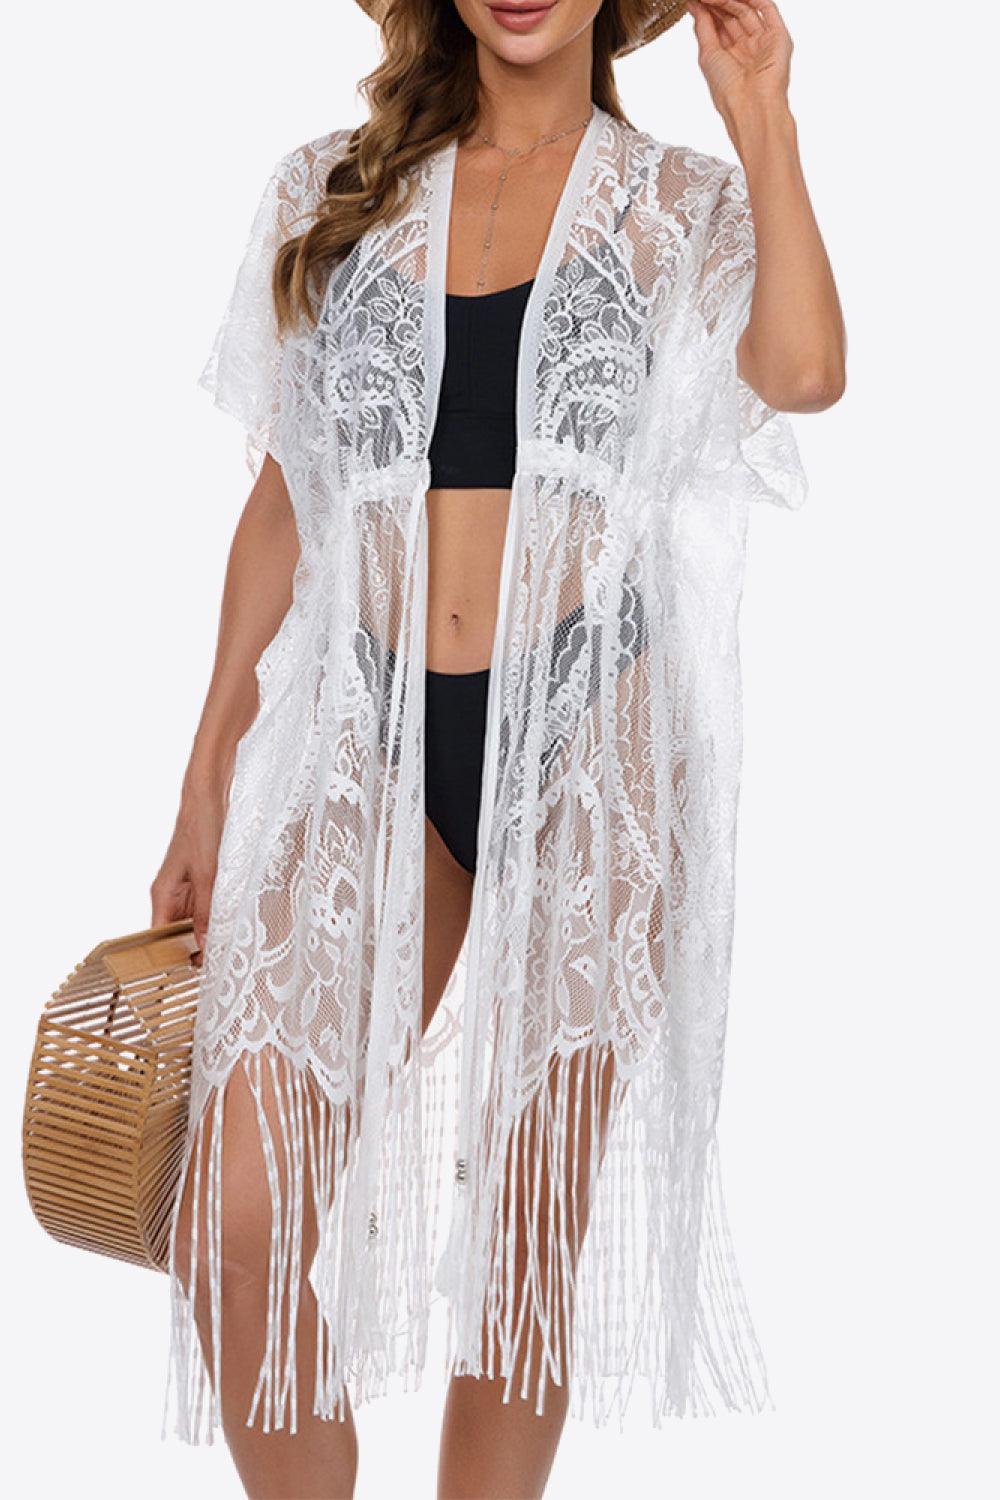 Seaside Fashion Open Front Lace Cover-Up Dress - MXSTUDIO.COM